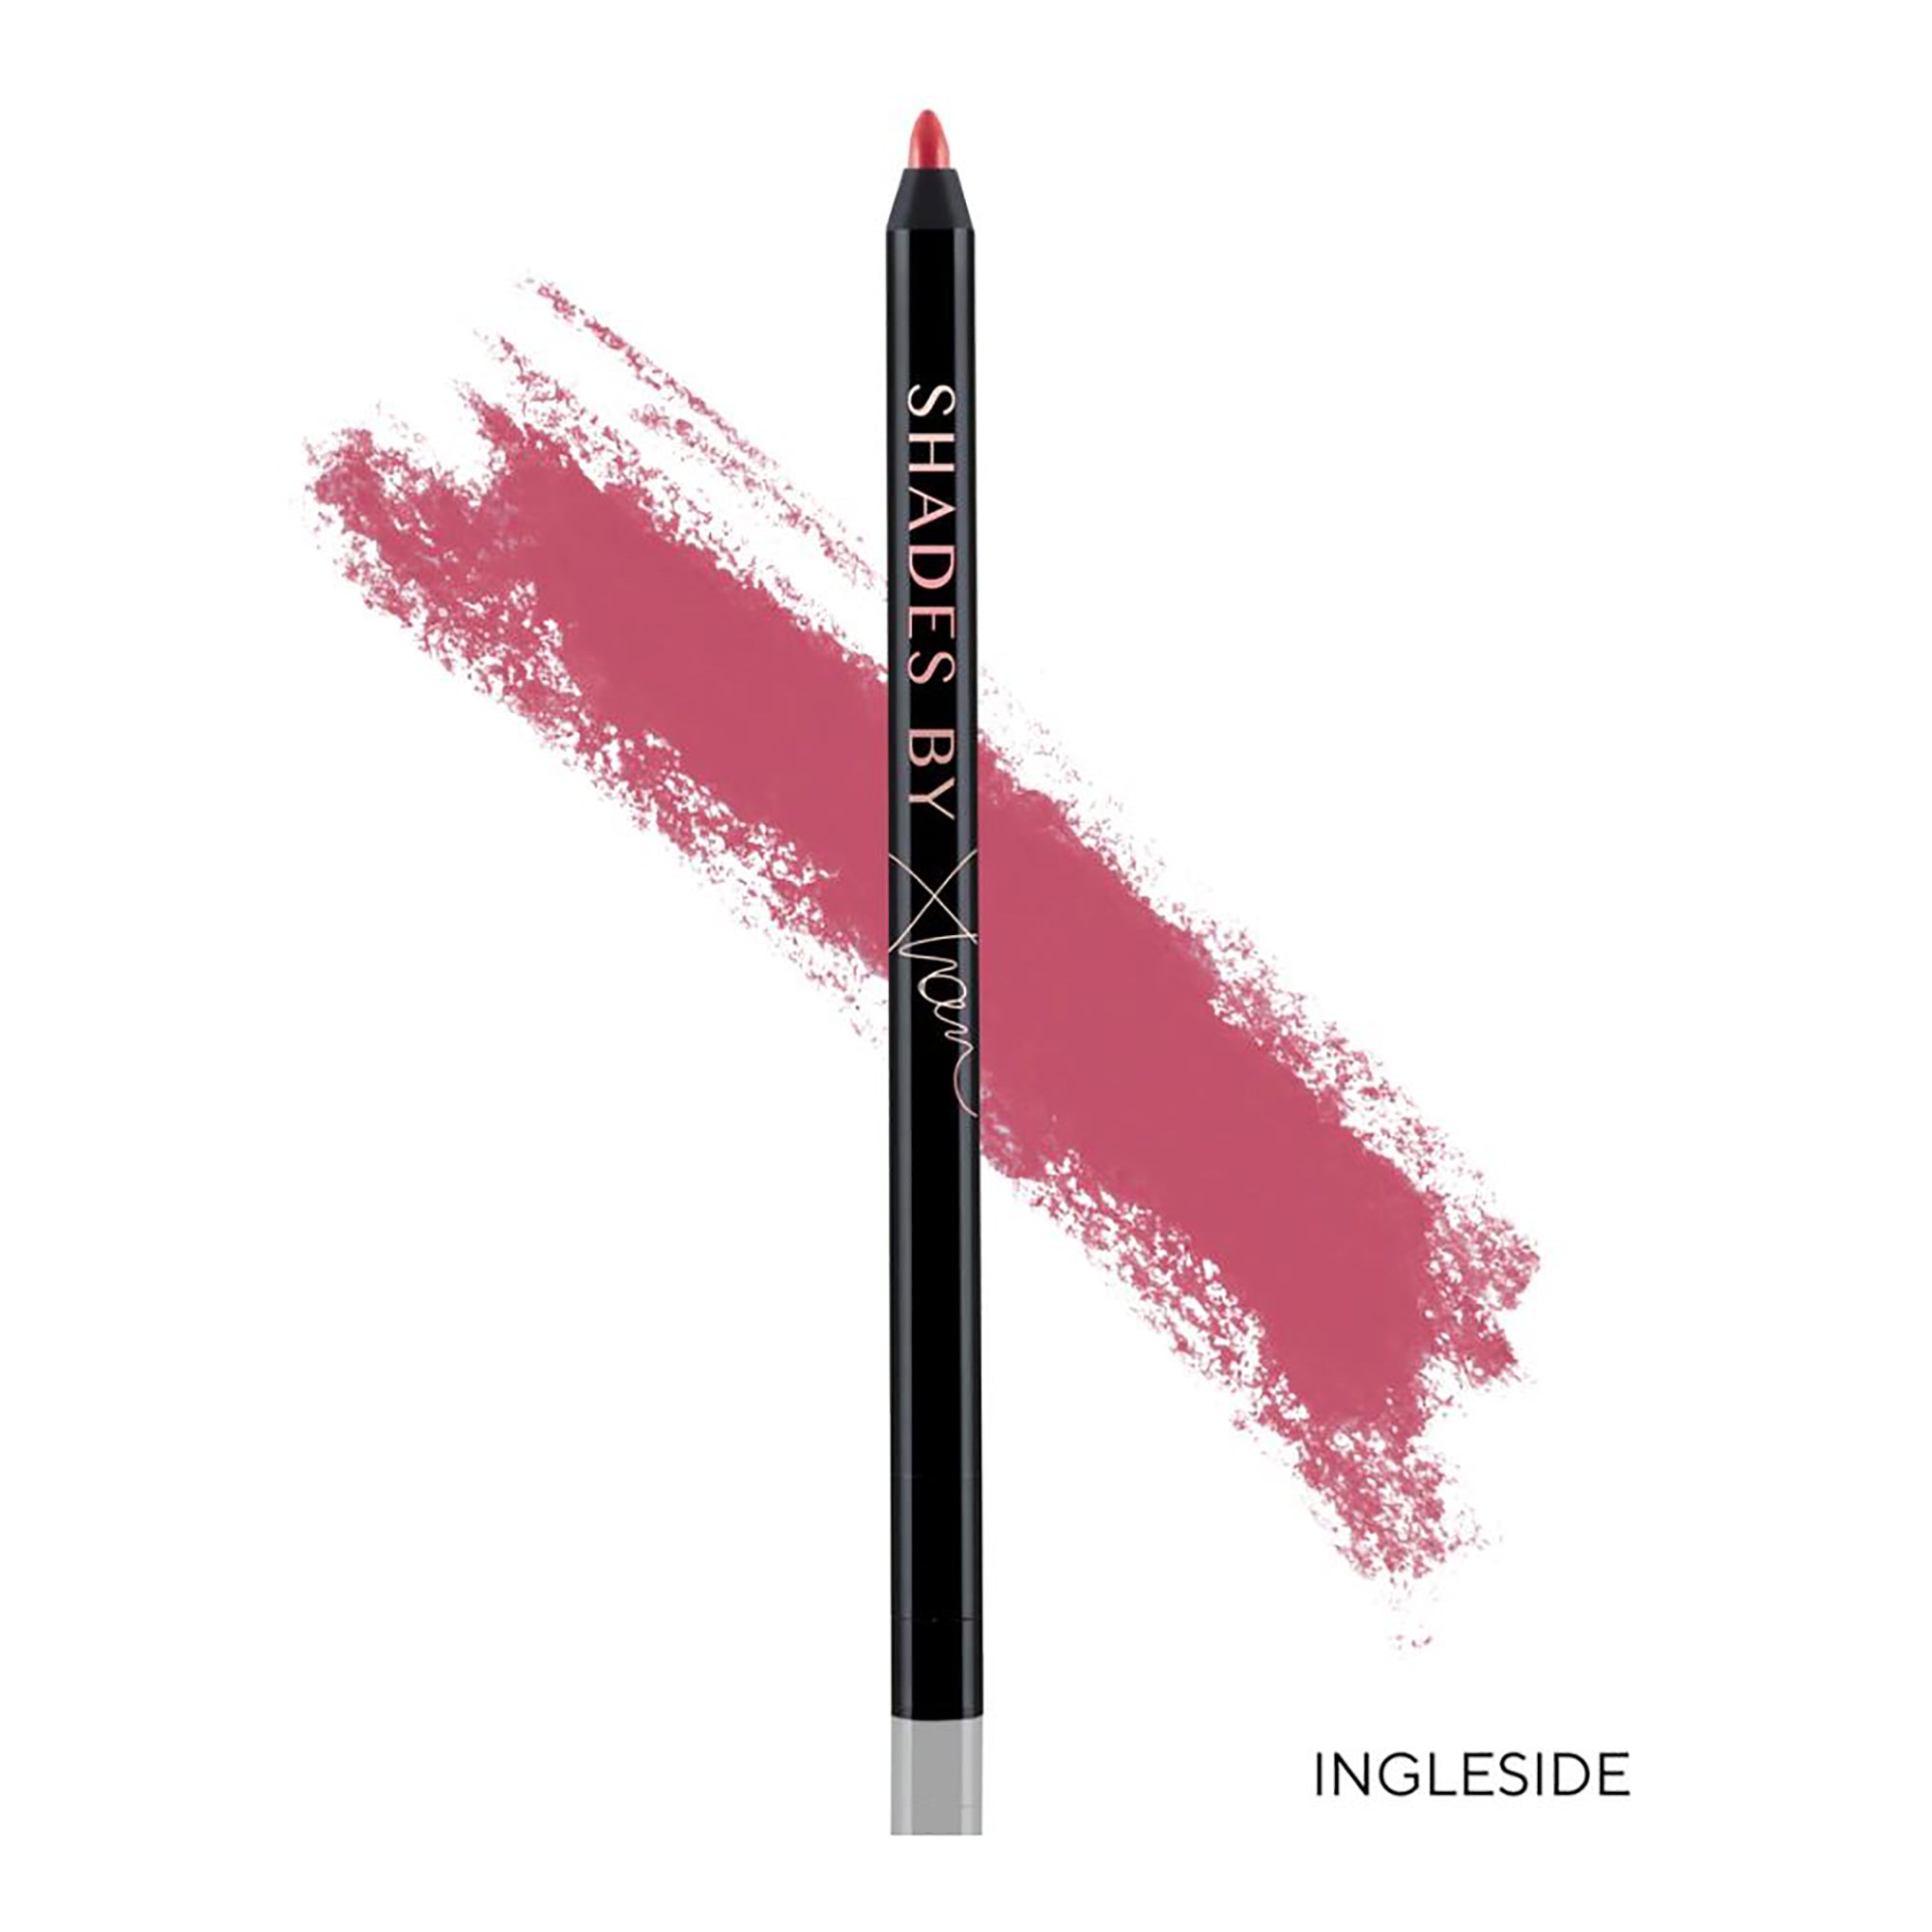 Shades by Shan Lip Liner in Shade Ingleside / INGLESIDE